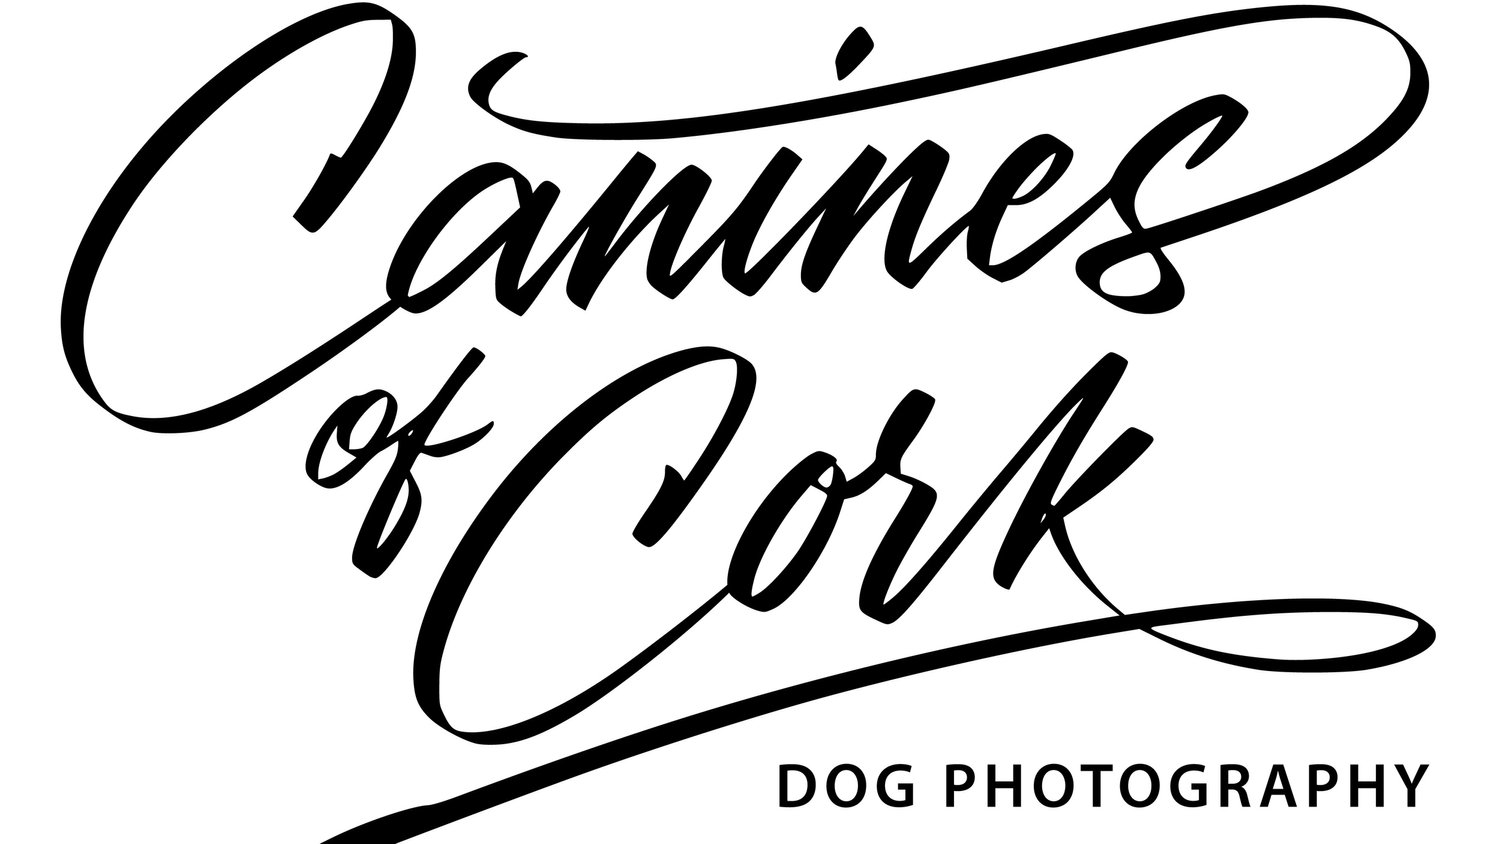 Canines of Cork